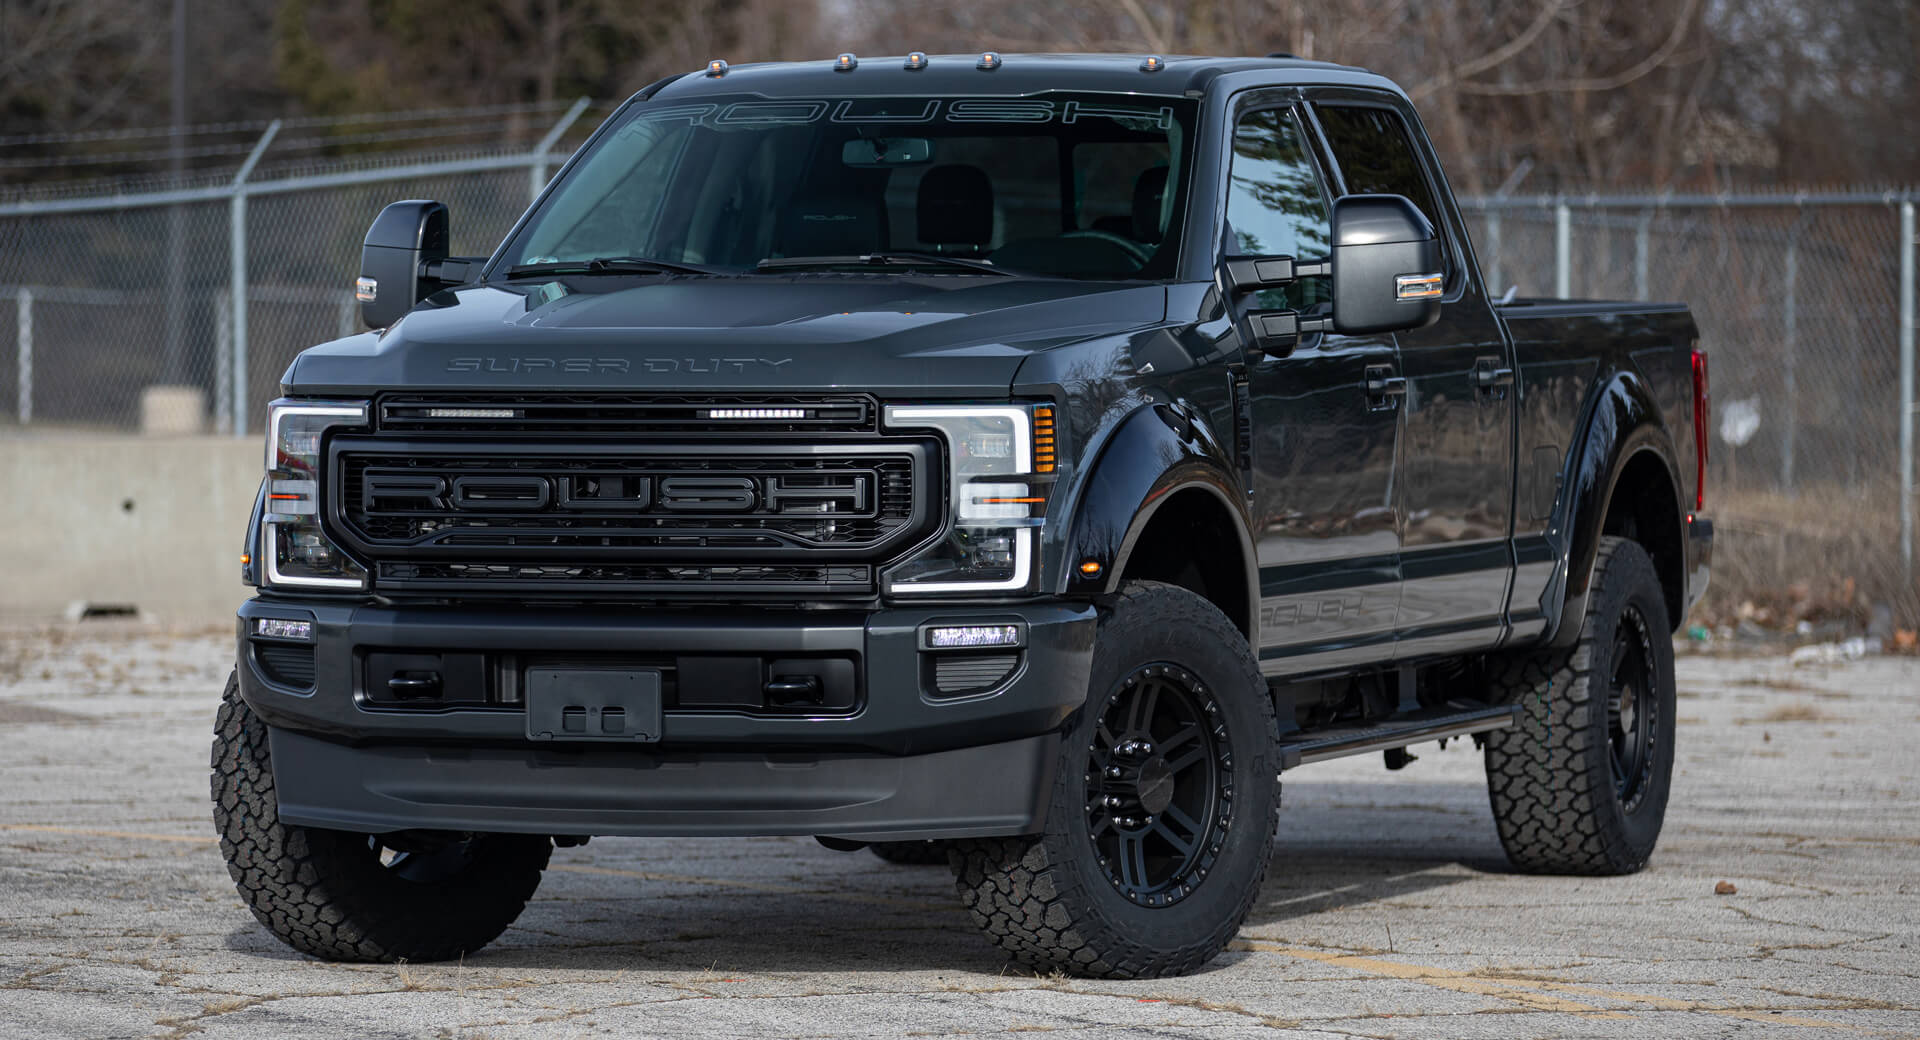 2021 Roush Super Duty Tuning Package Launched For The Ford F-250 And F-350  Trucks | Carscoops